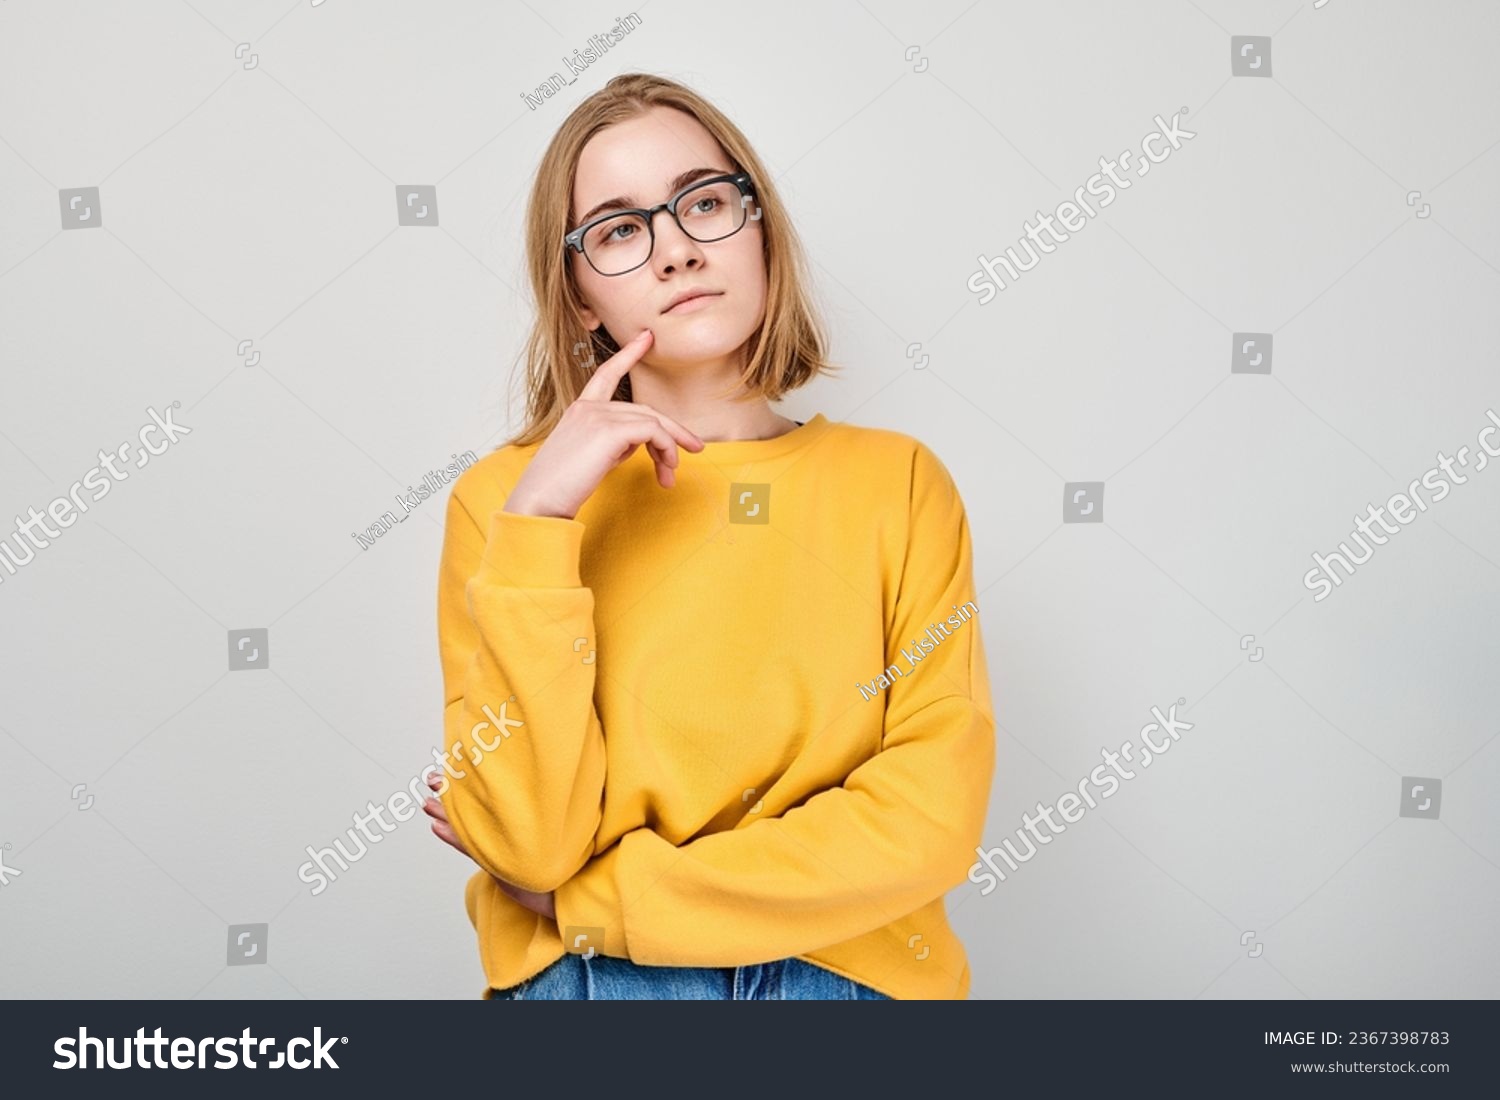 Clever blond student girl with glasses touch chin thinks, chooses isolated on white studio background with copy space. Confidence smart genius #2367398783